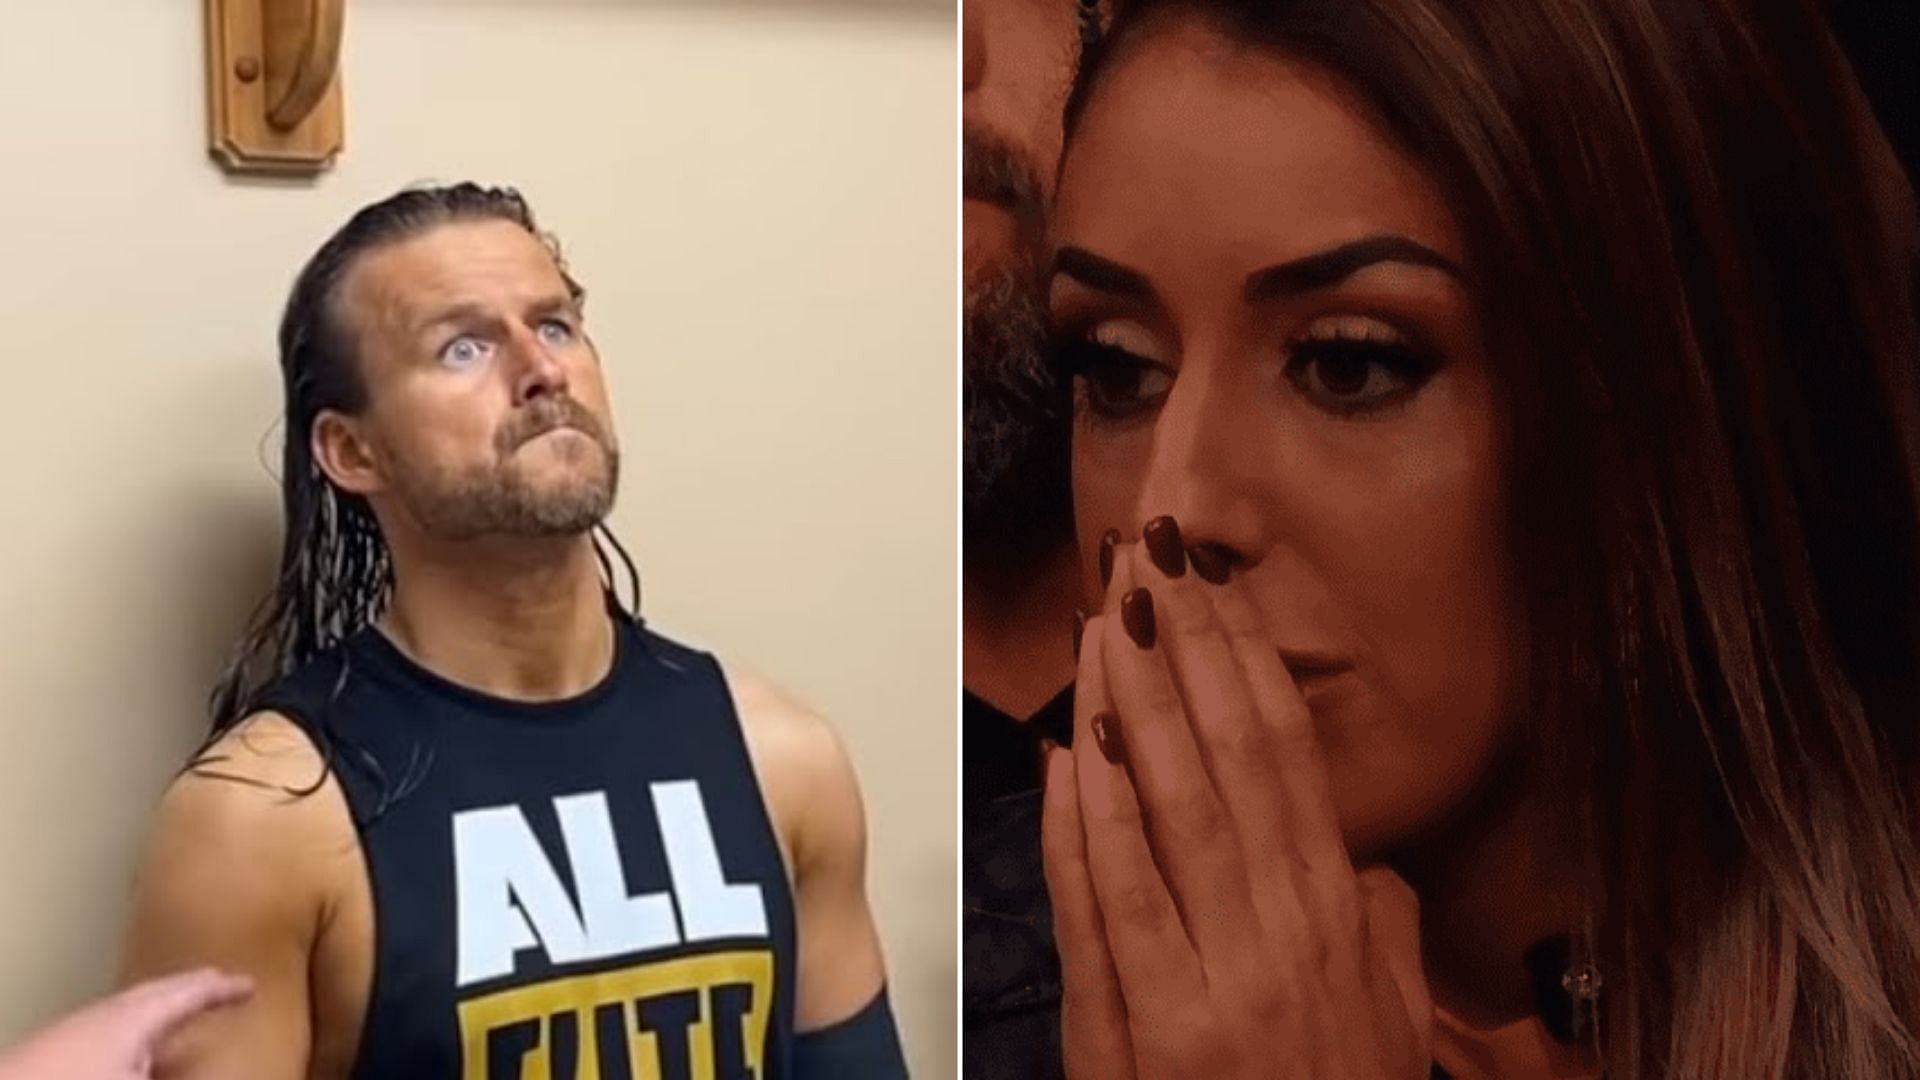 Adam Cole and Britt Baker have been dating since 2017